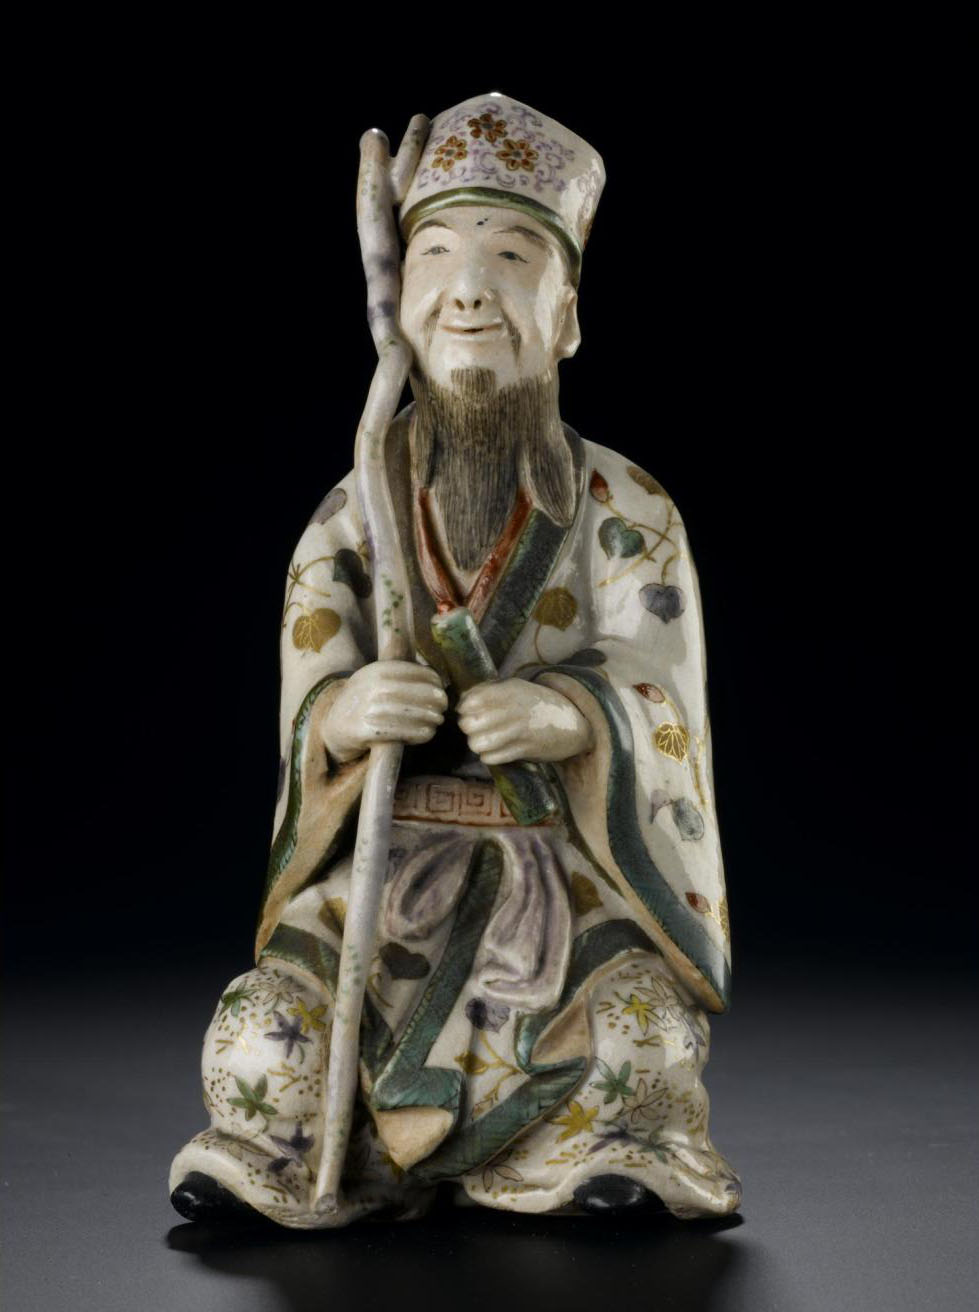 Figure of Jurojin seated on a small rock, from a set representing the Seven Gods of Good Fortune: Japan, Satsuma, 19th century. On display in the Window on the World, National Museum of Scotland. 